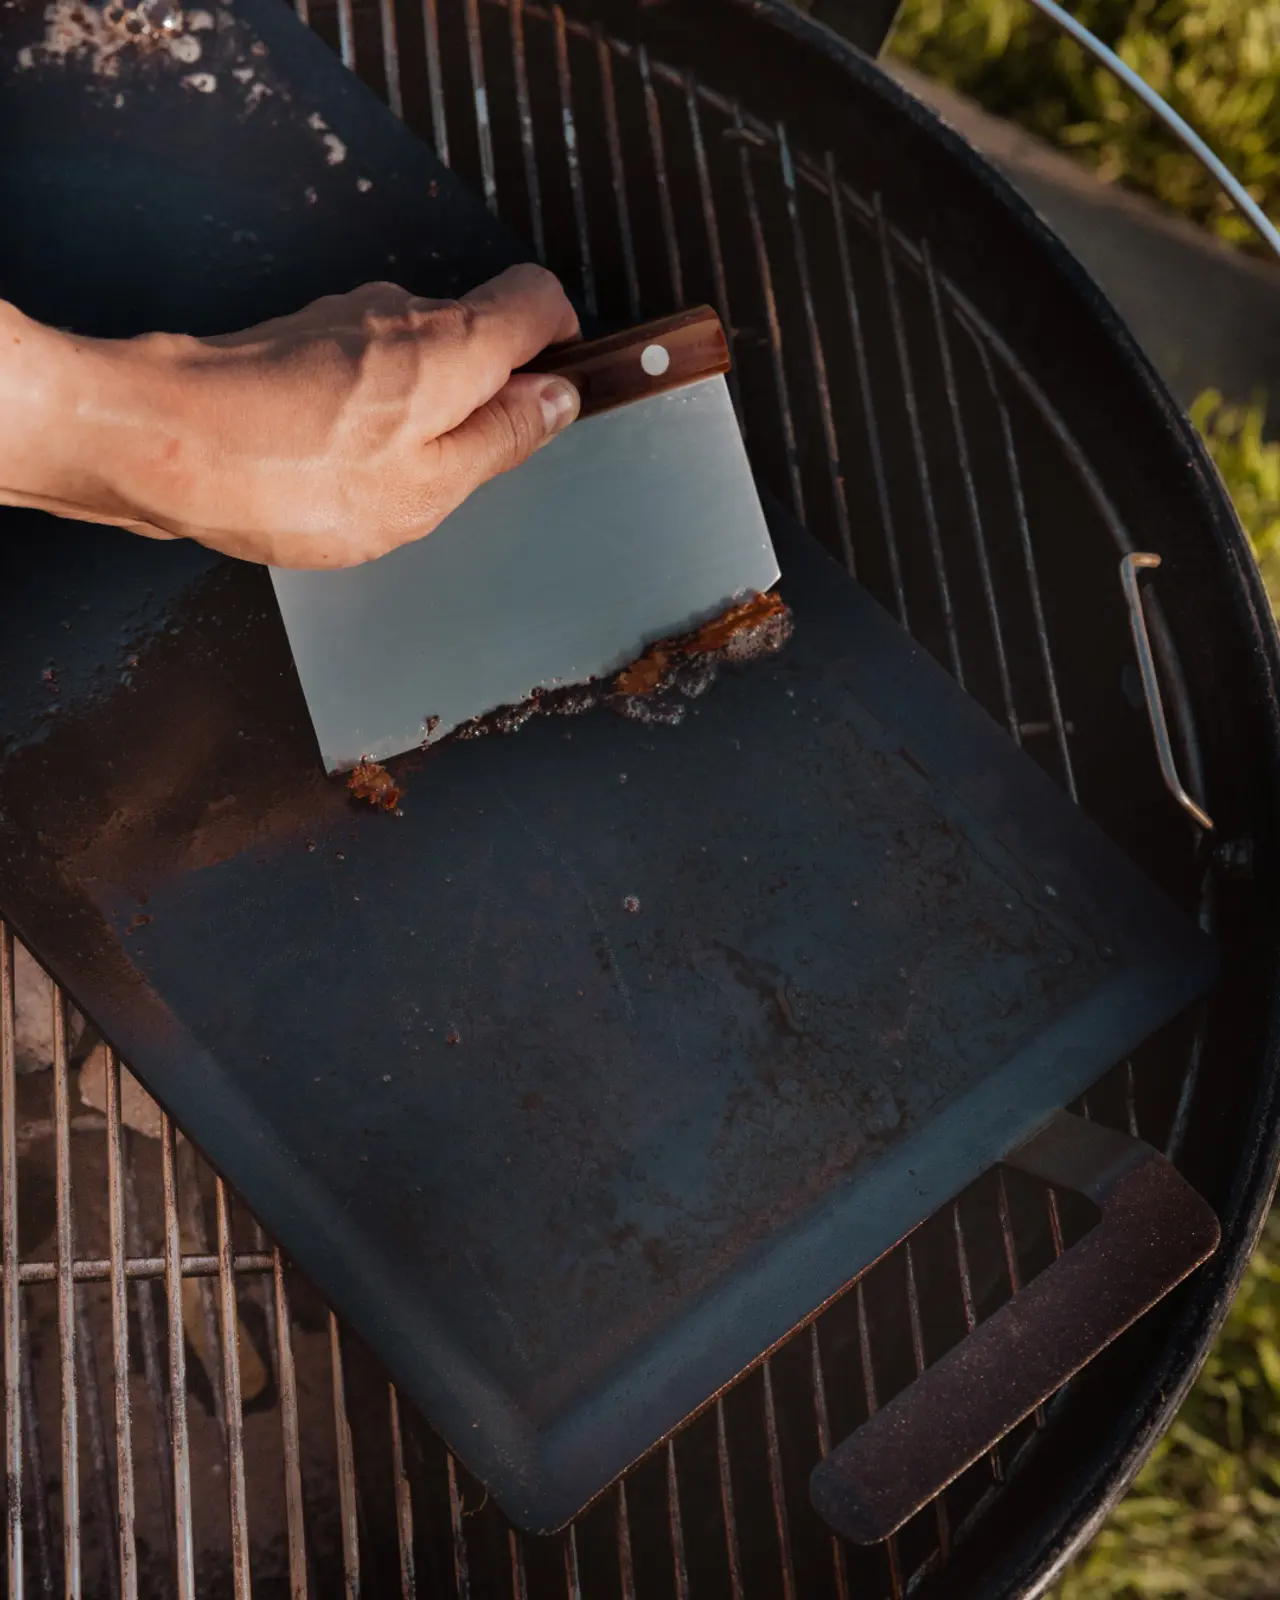 A person's hands are using a scraper to clean a grill, removing charred residue from its surface.